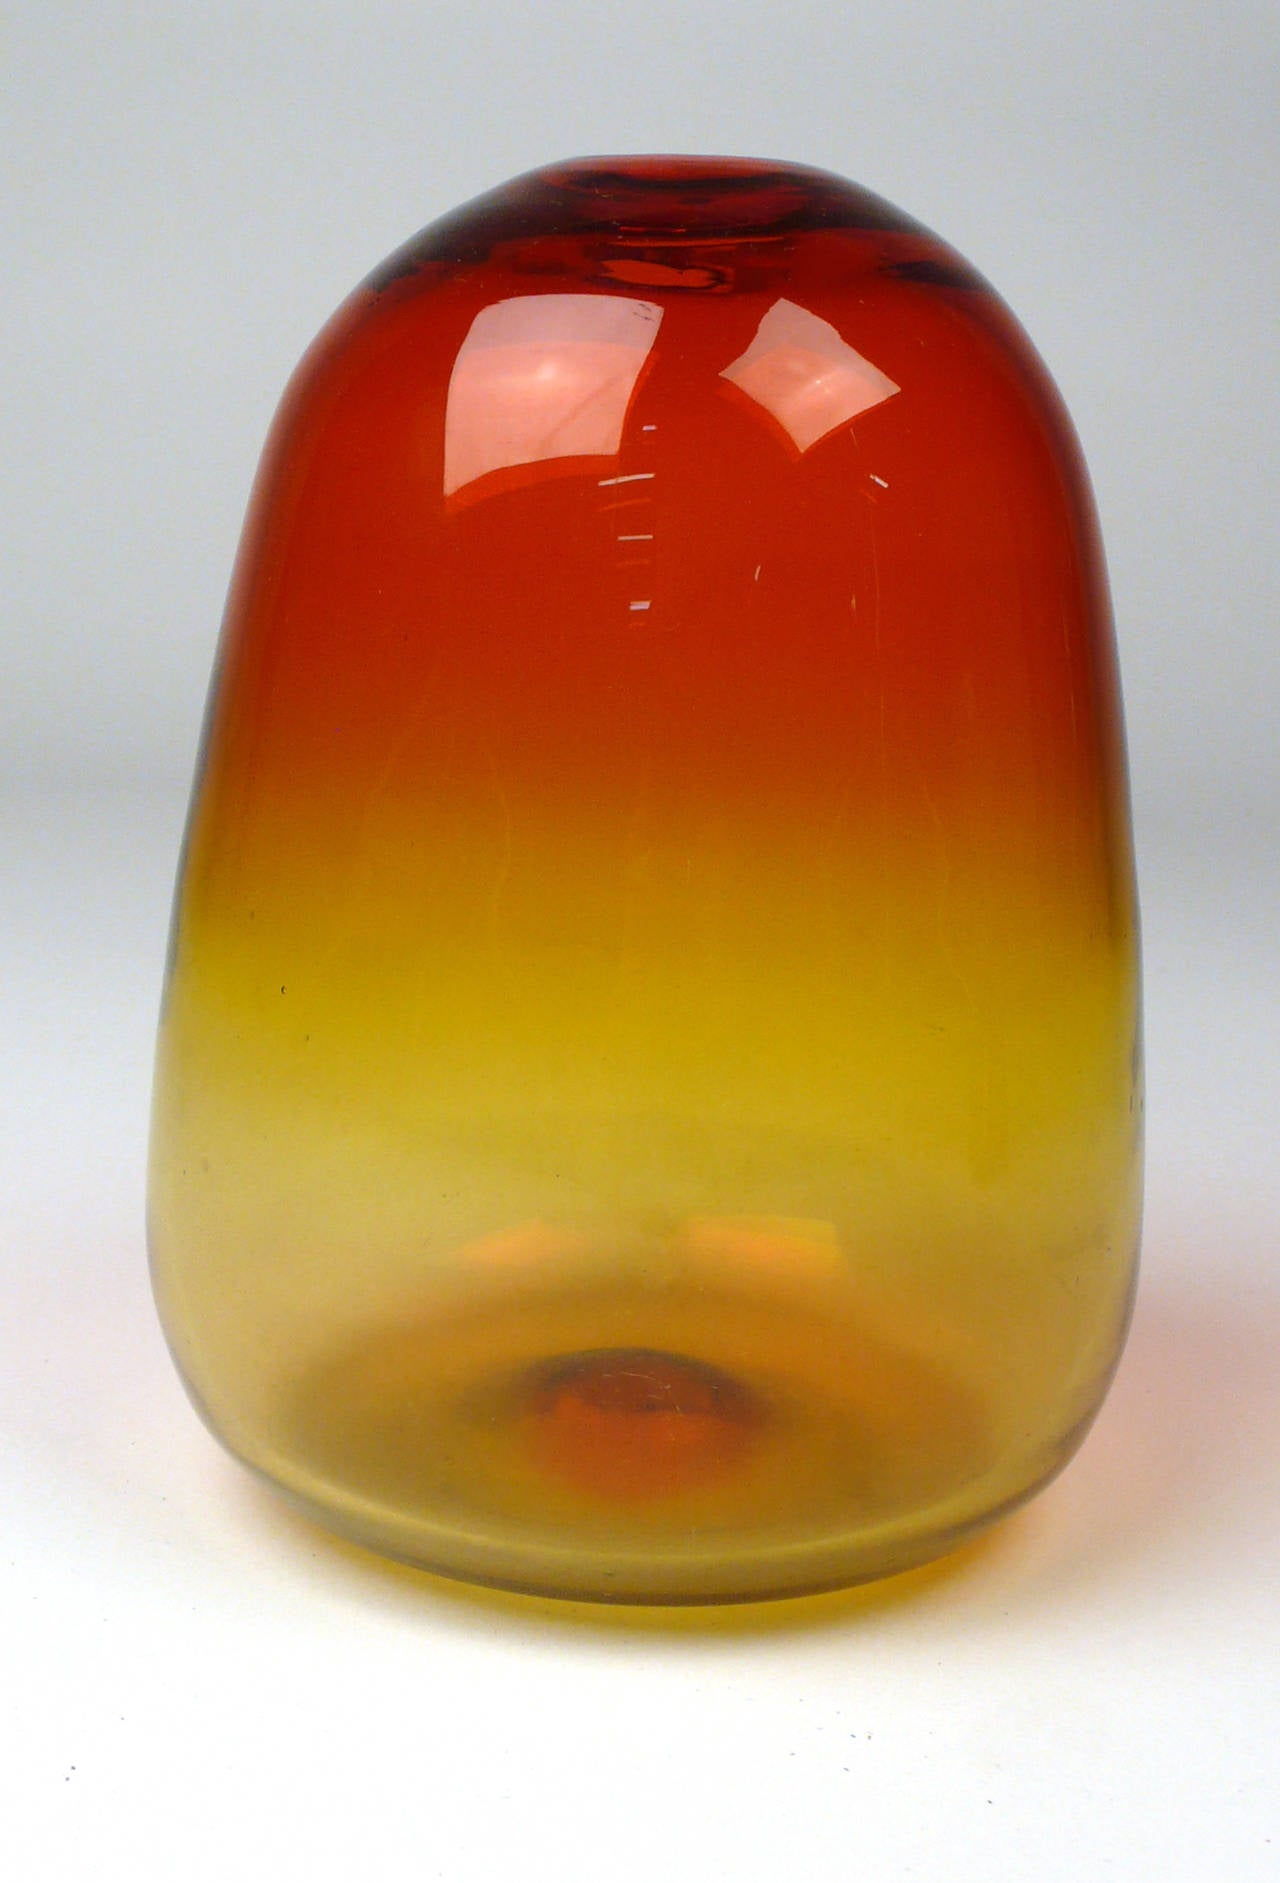 Early handcrafted Blenko Bud vase in Tangerine. Shown in the 1957 Blenko catalogue as model 5723. In perfect condition.